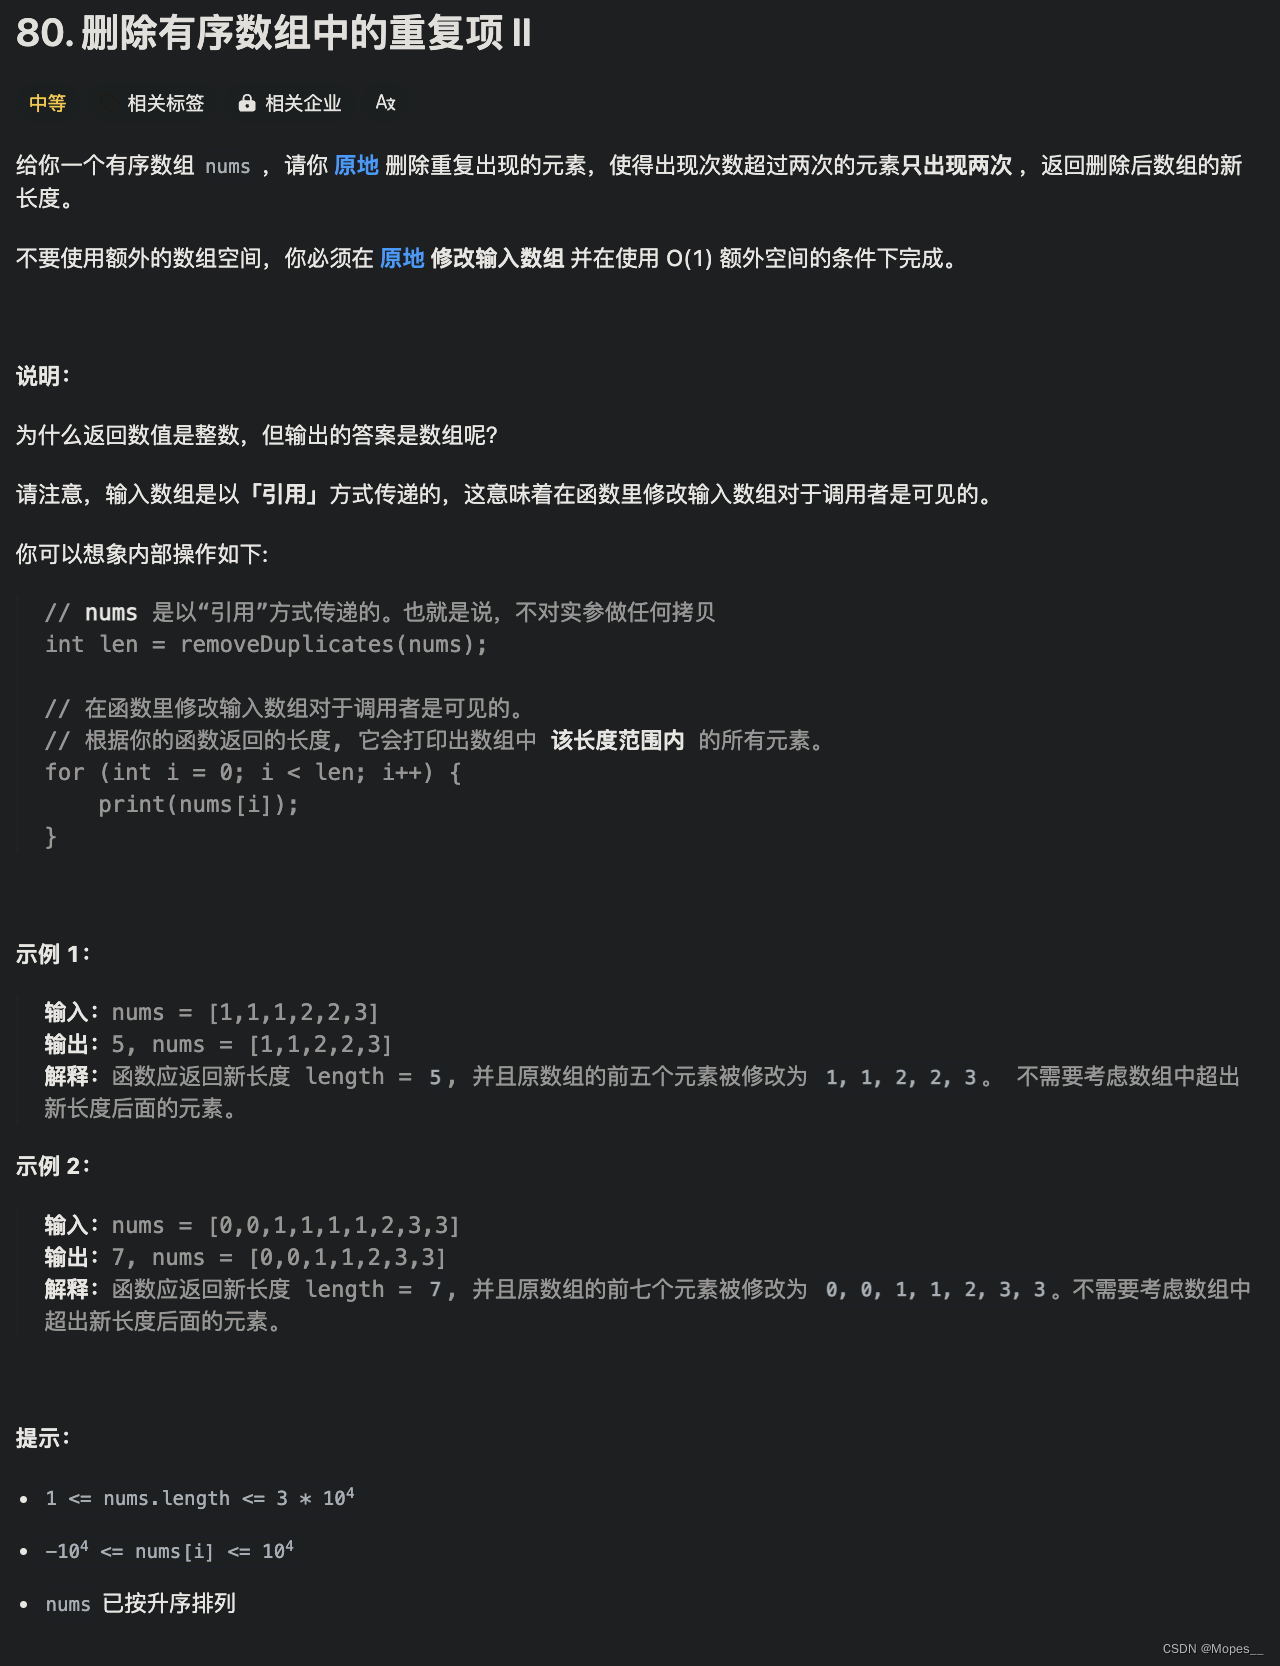 Python | <span style='color:red;'>Leetcode</span> Python题解之第<span style='color:red;'>80</span><span style='color:red;'>题</span><span style='color:red;'>删除</span><span style='color:red;'>有序</span><span style='color:red;'>数组</span><span style='color:red;'>中</span><span style='color:red;'>的</span><span style='color:red;'>重复</span><span style='color:red;'>项</span><span style='color:red;'>II</span>